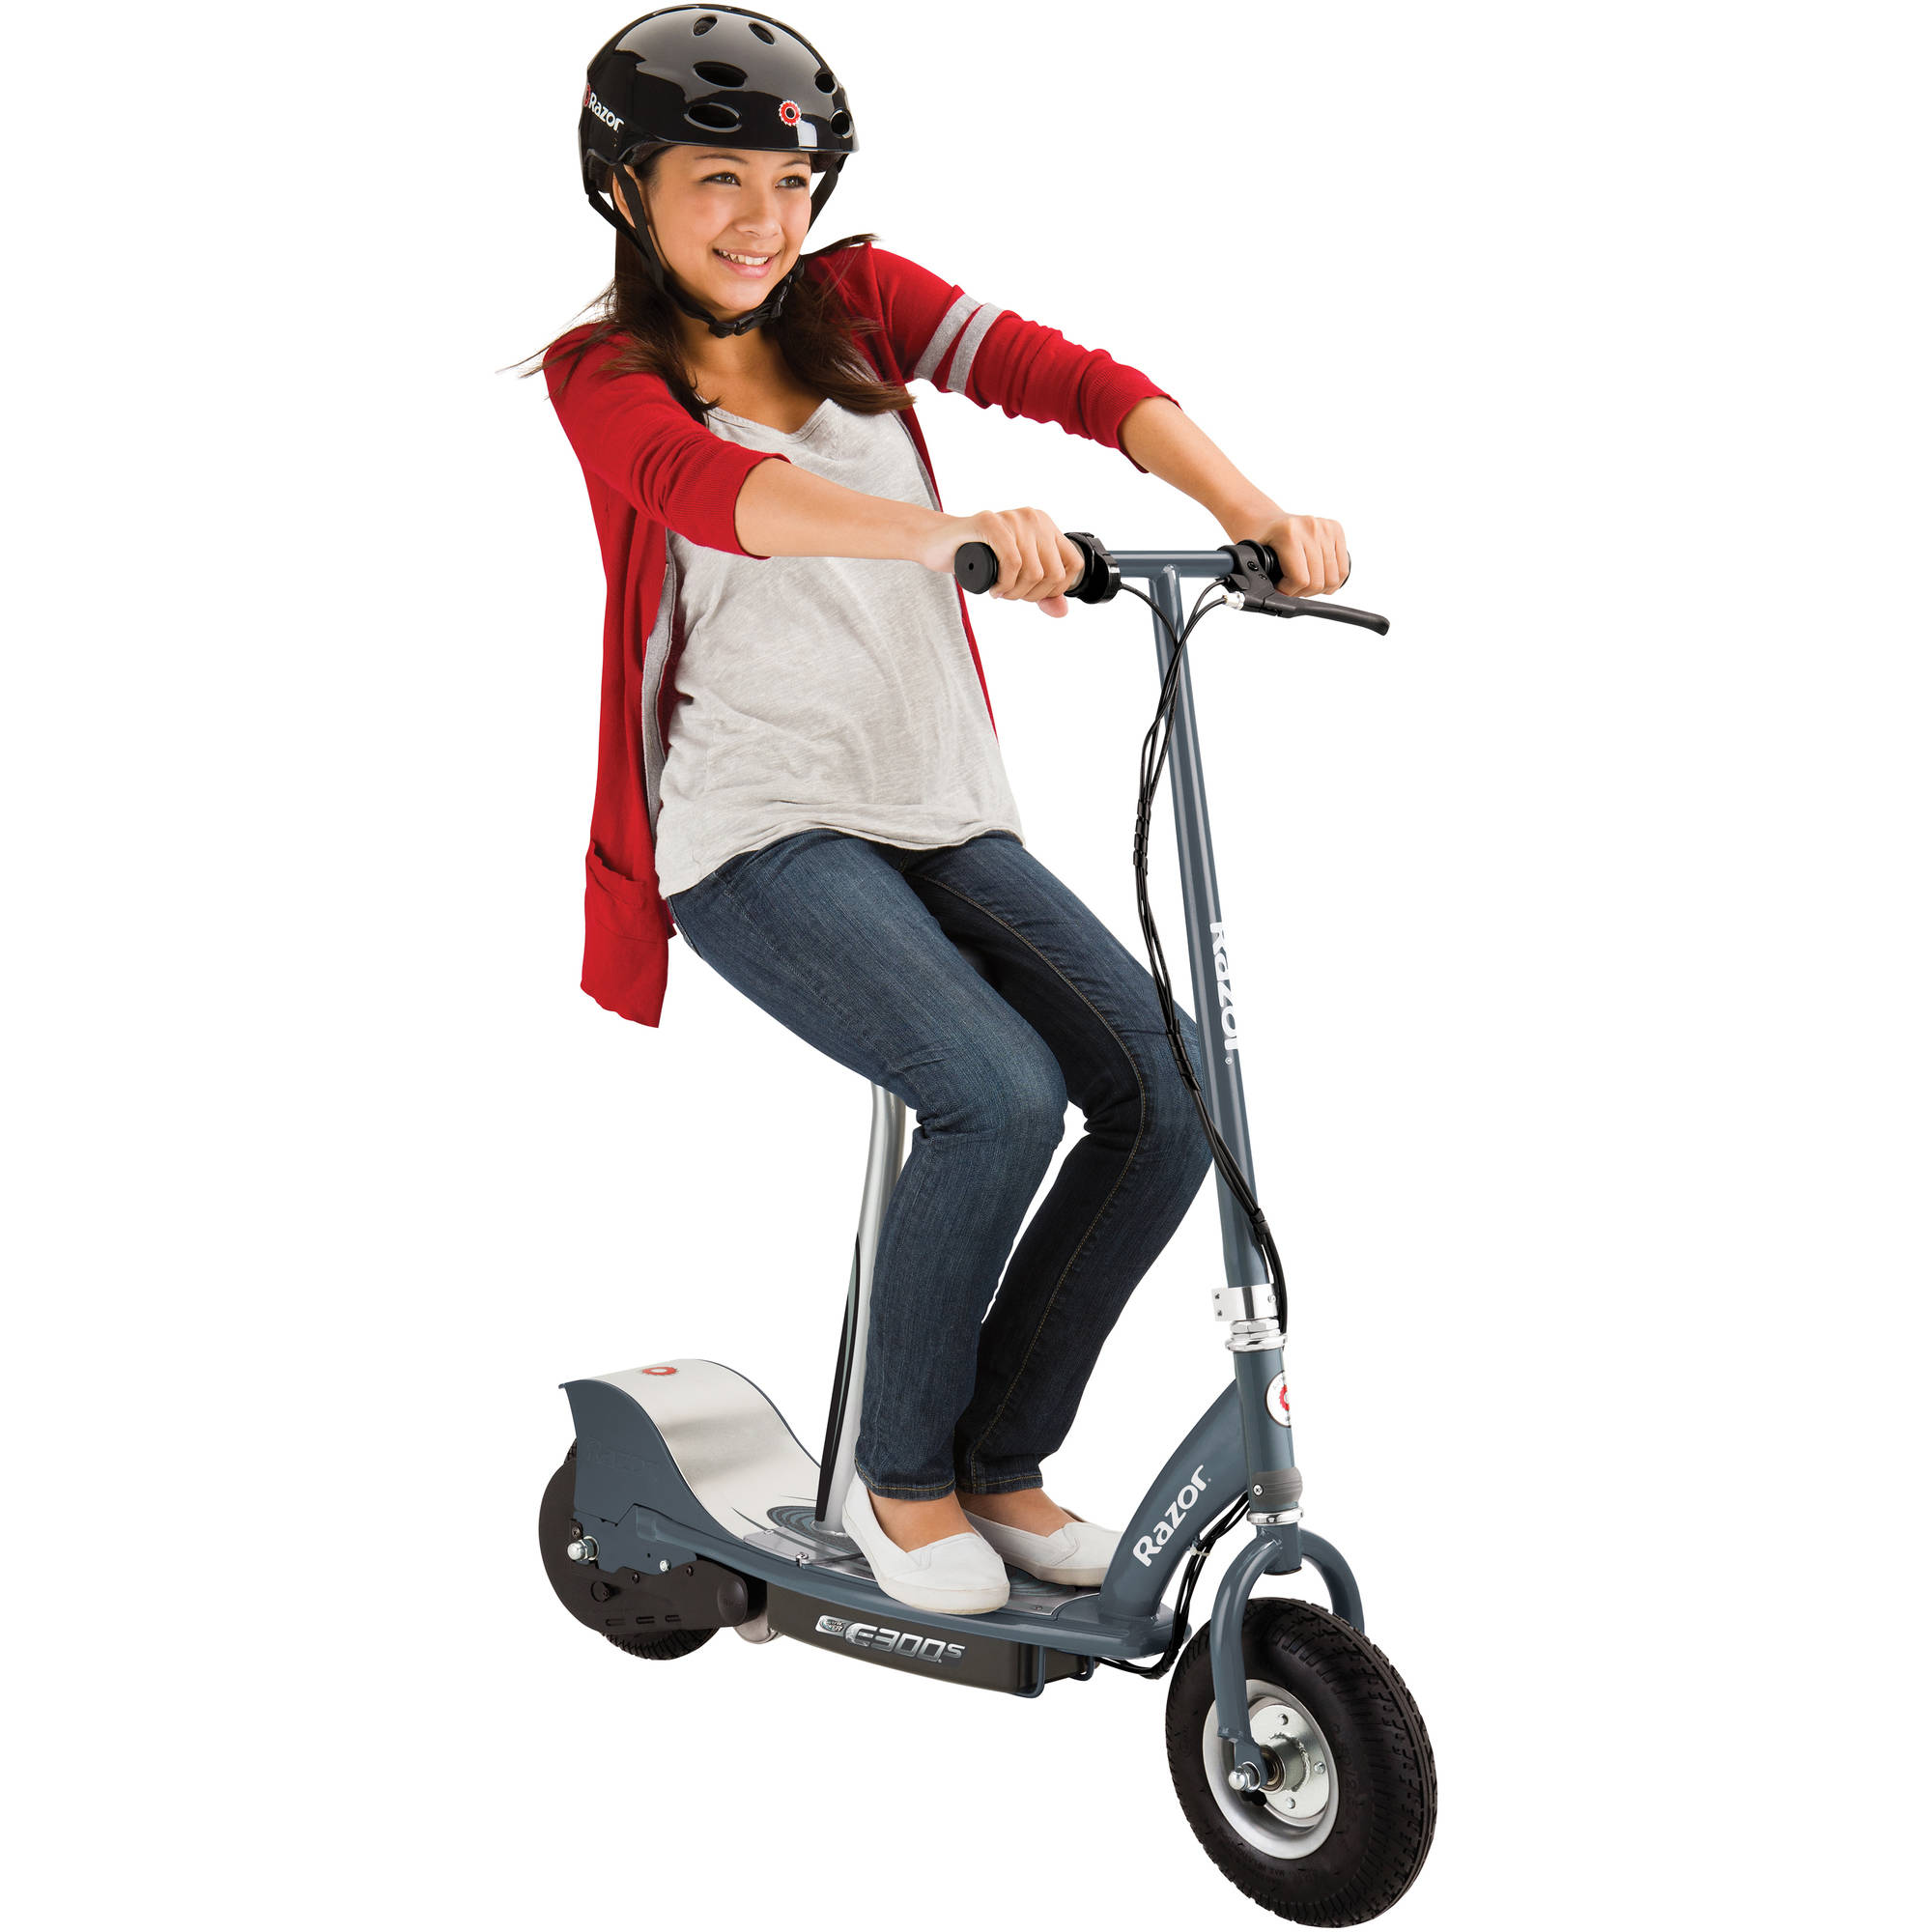 Razor E300S Seated Electric Scooter - Gray, for Ages 13+ and up to 220 lbs, 9" Pneumatic Front Tire, Up to 15 mph & up to 10-mile Range, 250W Chain Motor, 24V Sealed Lead-Acid Battery - image 5 of 12